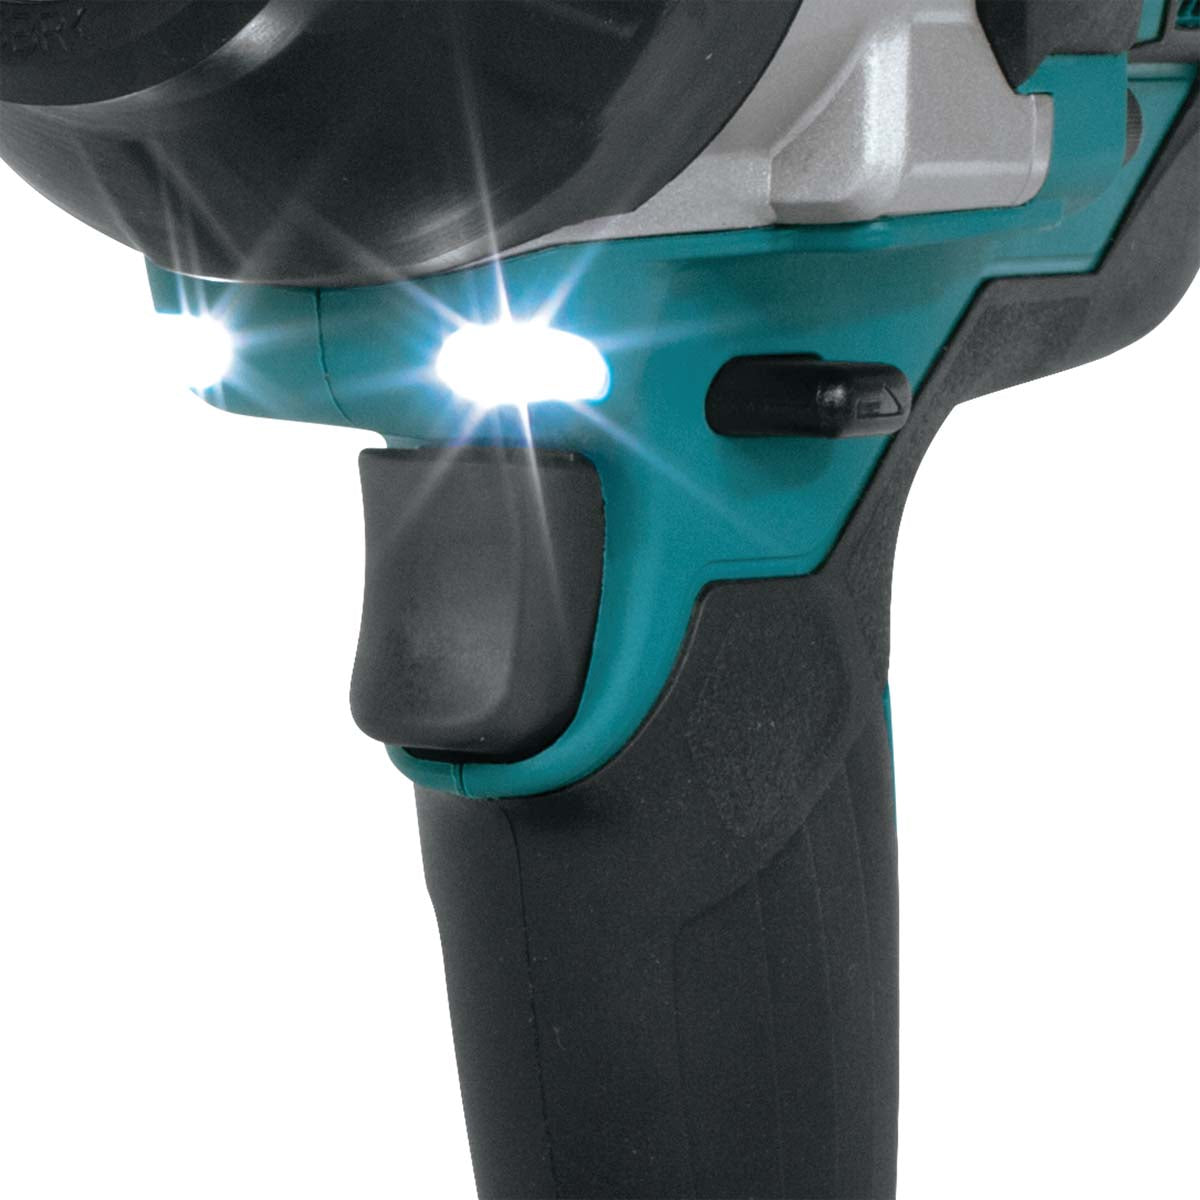 18V 7/16" Brushless Impact Wrench Bare (Tool Only) DTW800Z by Makita